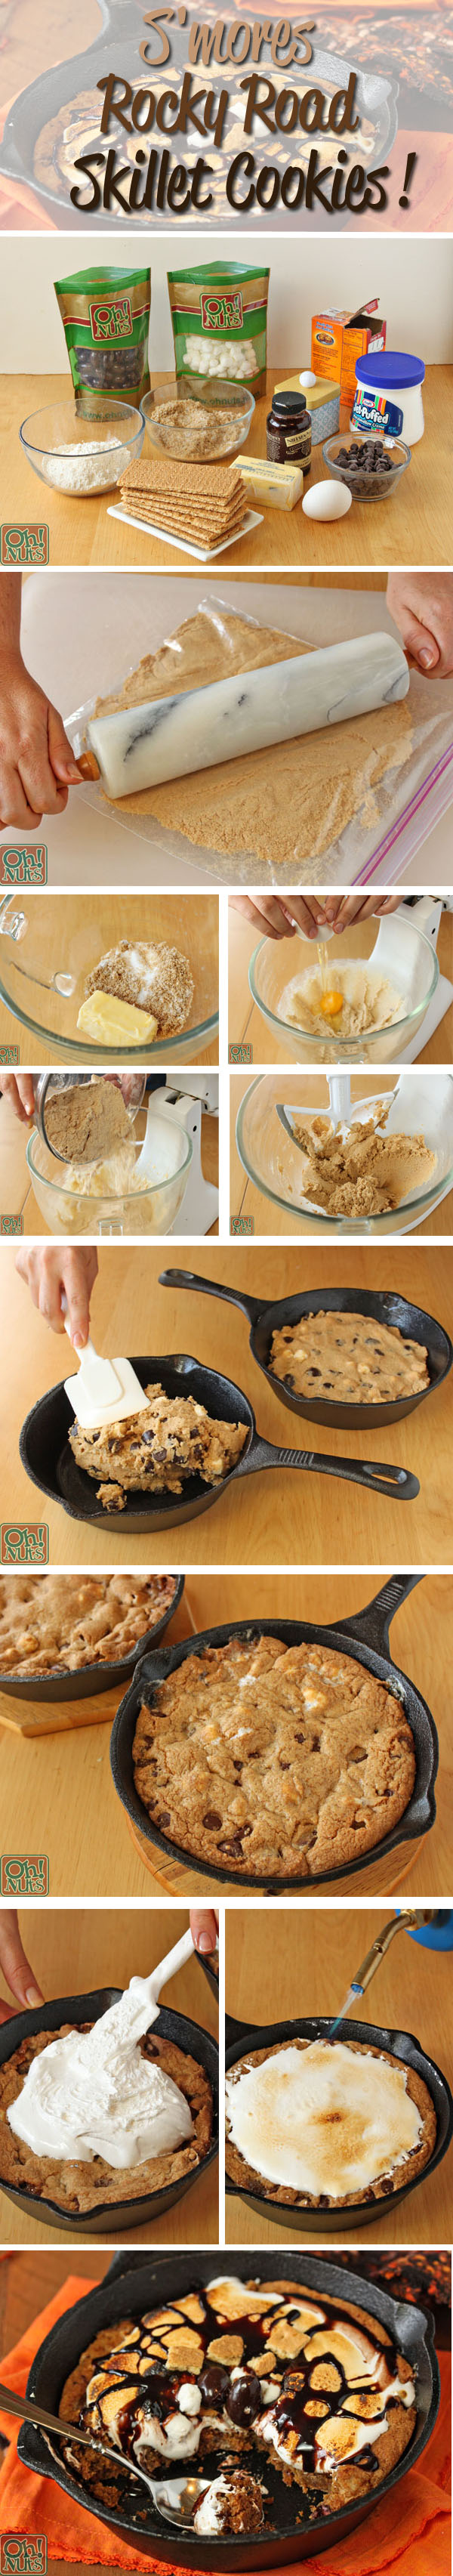 How to Giant Rocky Road S'mores Cookie Baked in a Skillet